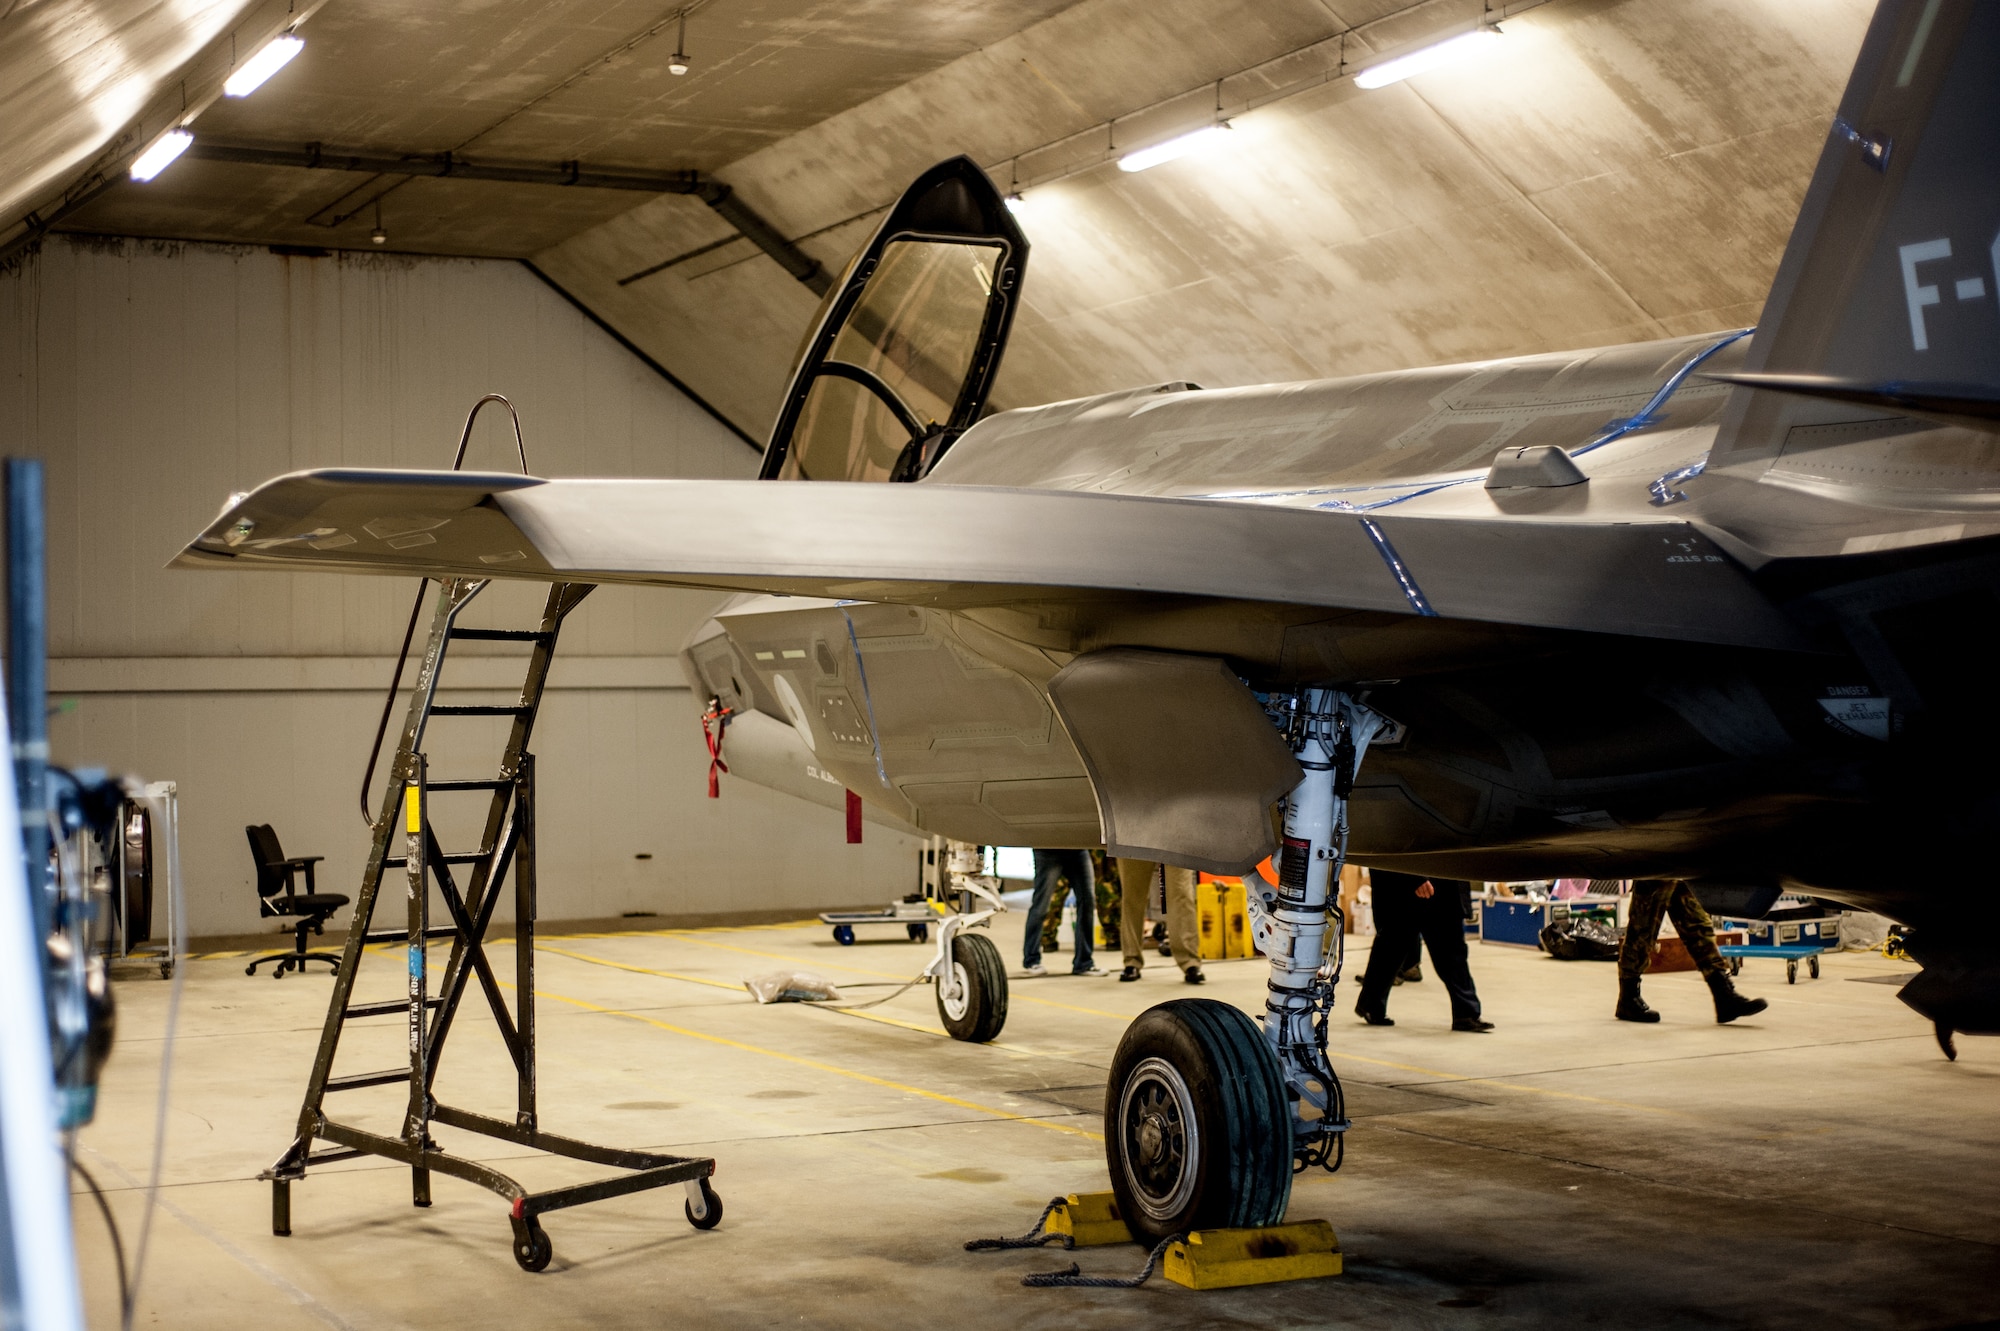 An F-35 is parked inside a hardened aircraft shelter in the Netherlands during a testing session, led by acoustics experts in the Air Force Research Laboratory’s 711th Human Performance Wing. The team gathered acoustics data for the Netherlands Royal Air Force by affixing microphones to the fighter’s skin with a blue tape-like material and epoxies to avoid damaging the surface coatings, and then running up the engine. (Photo courtesy of Royal Netherlands Air Force)